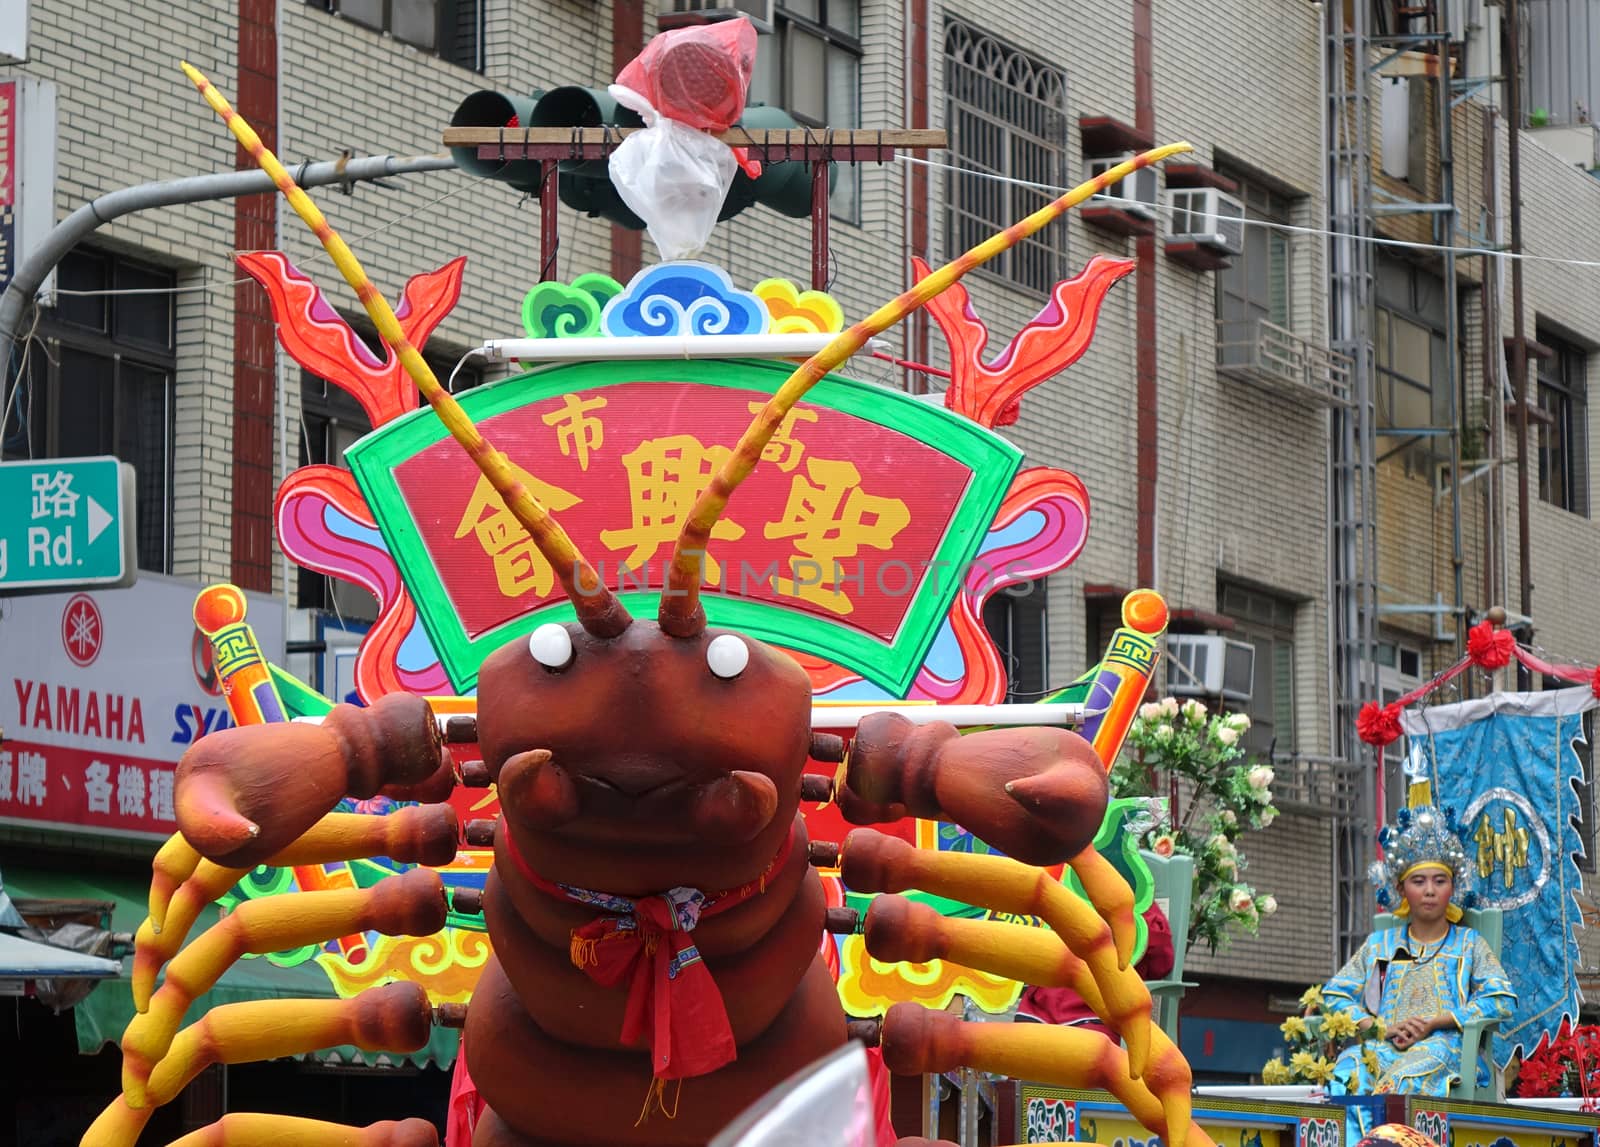 Large Float in the Shape of a Lobster by shiyali